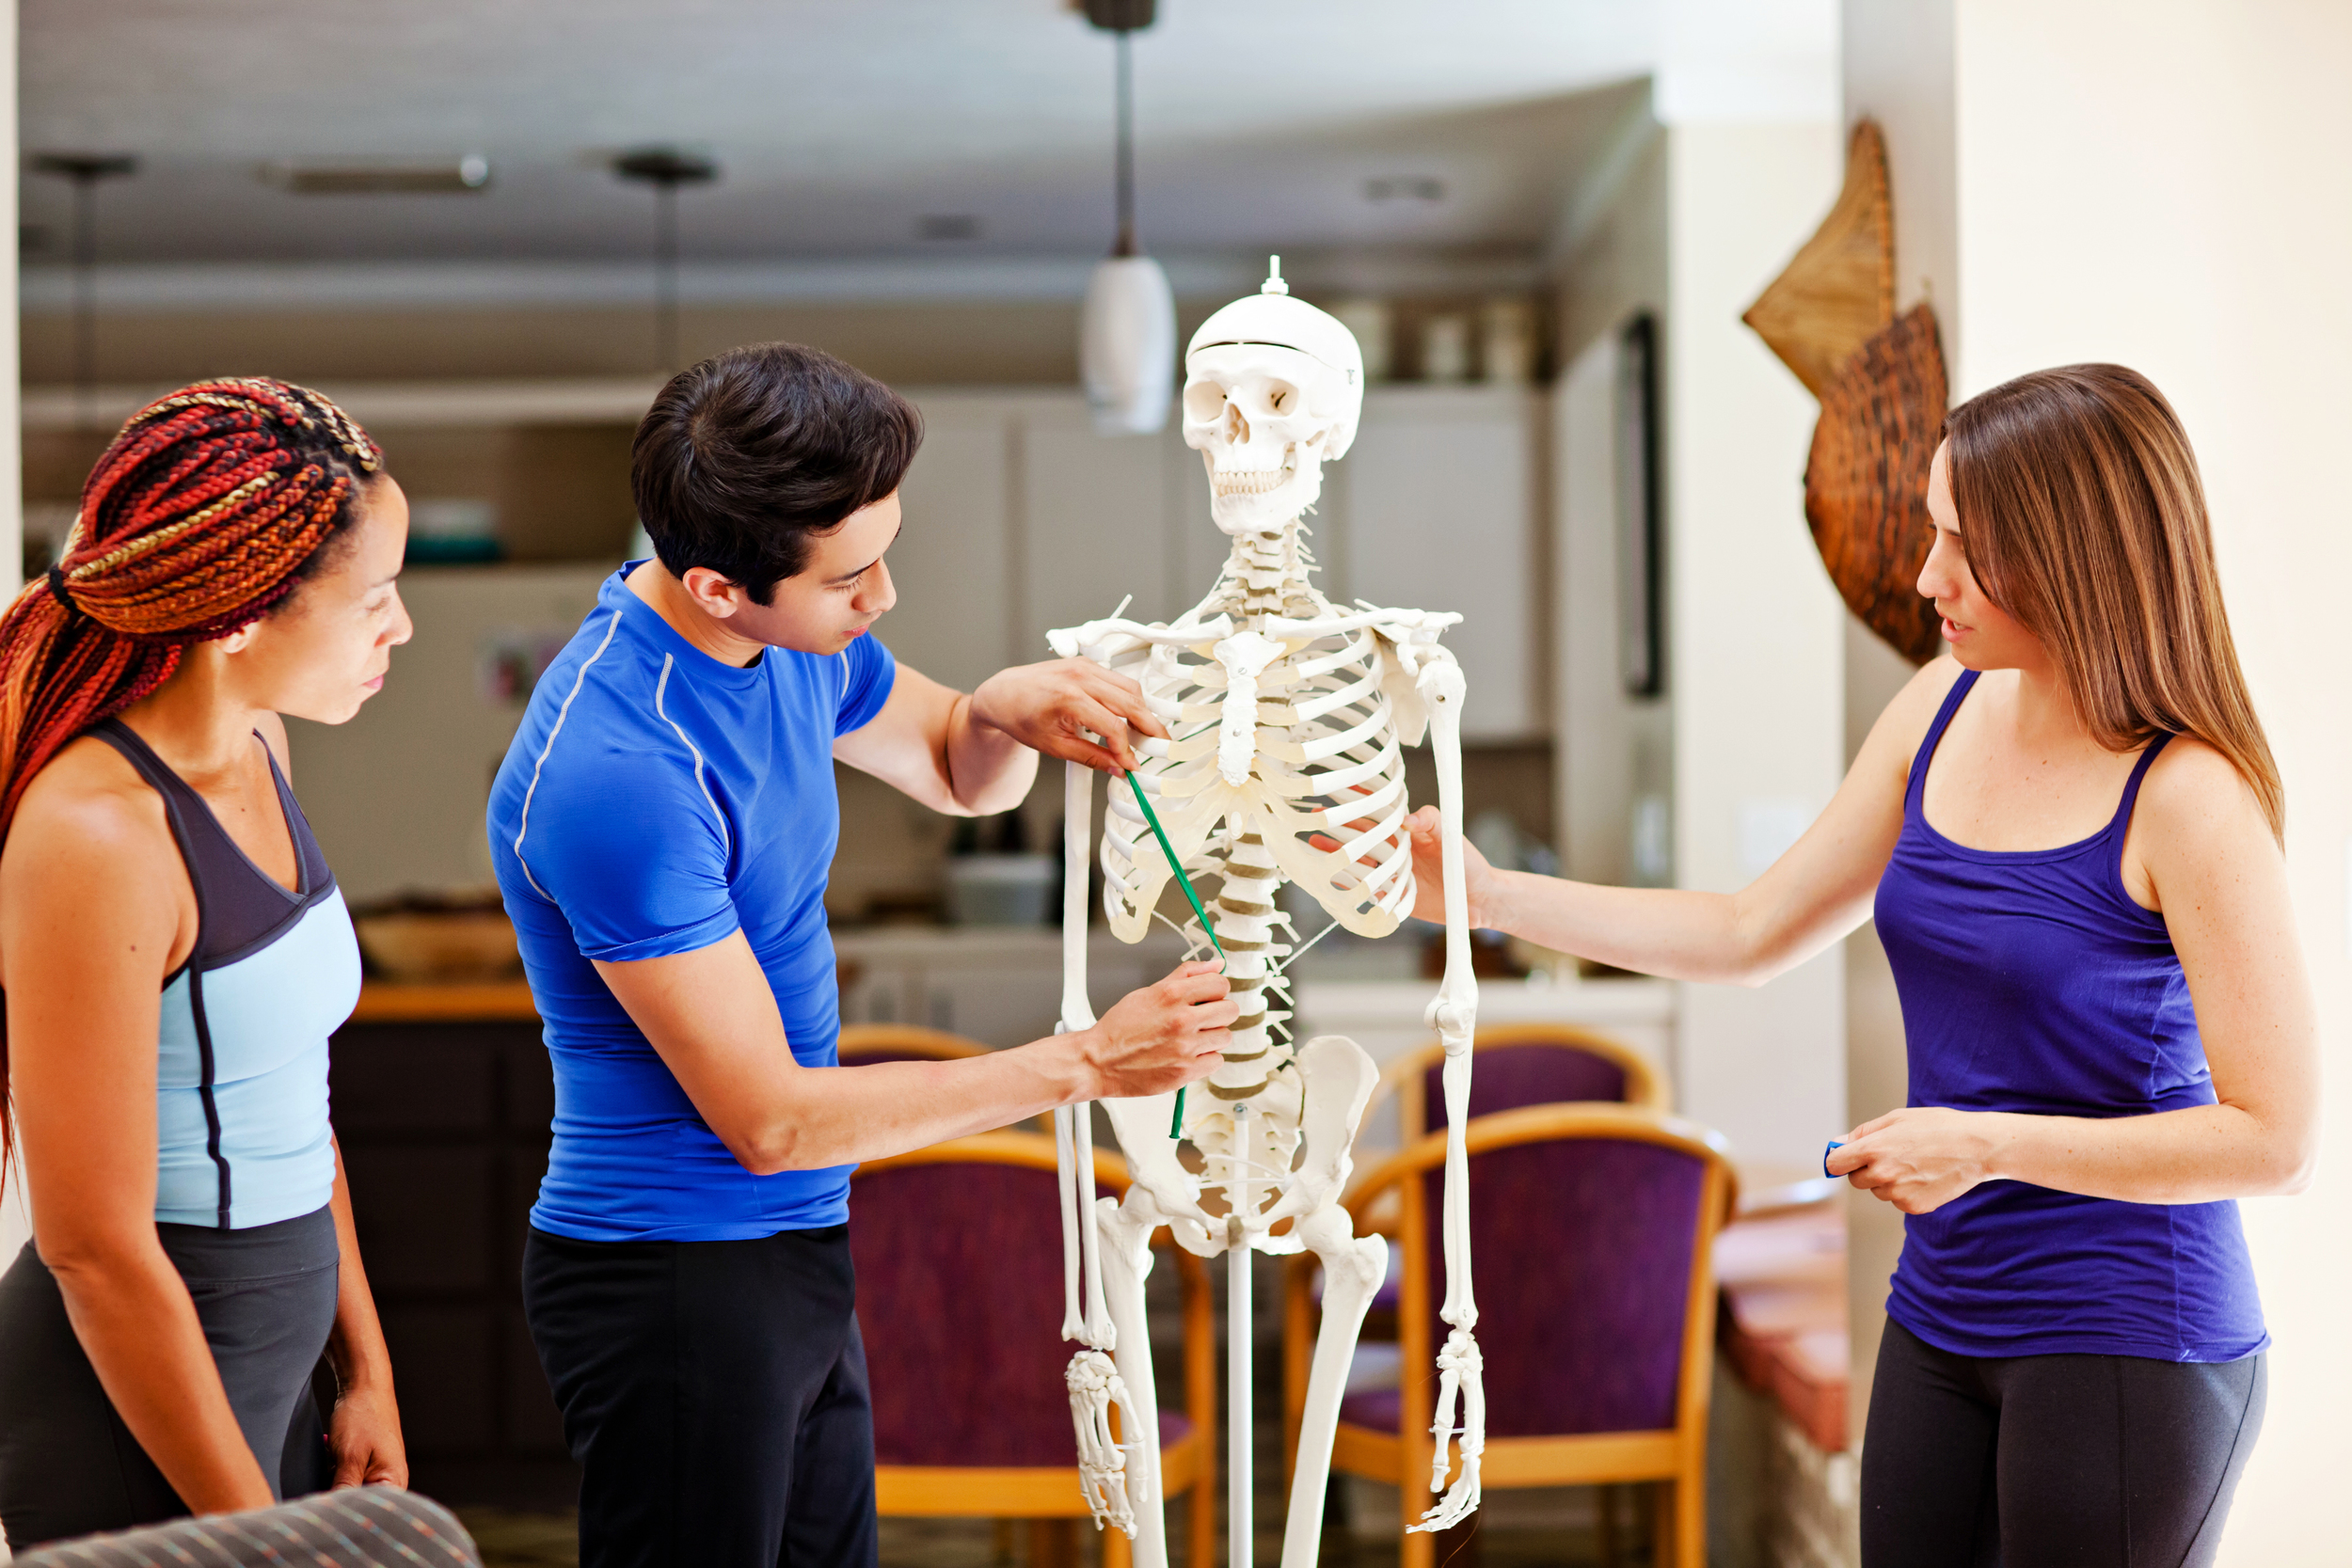  Pair muscles with movement in  Andy's Anatomy Program   Learn More  